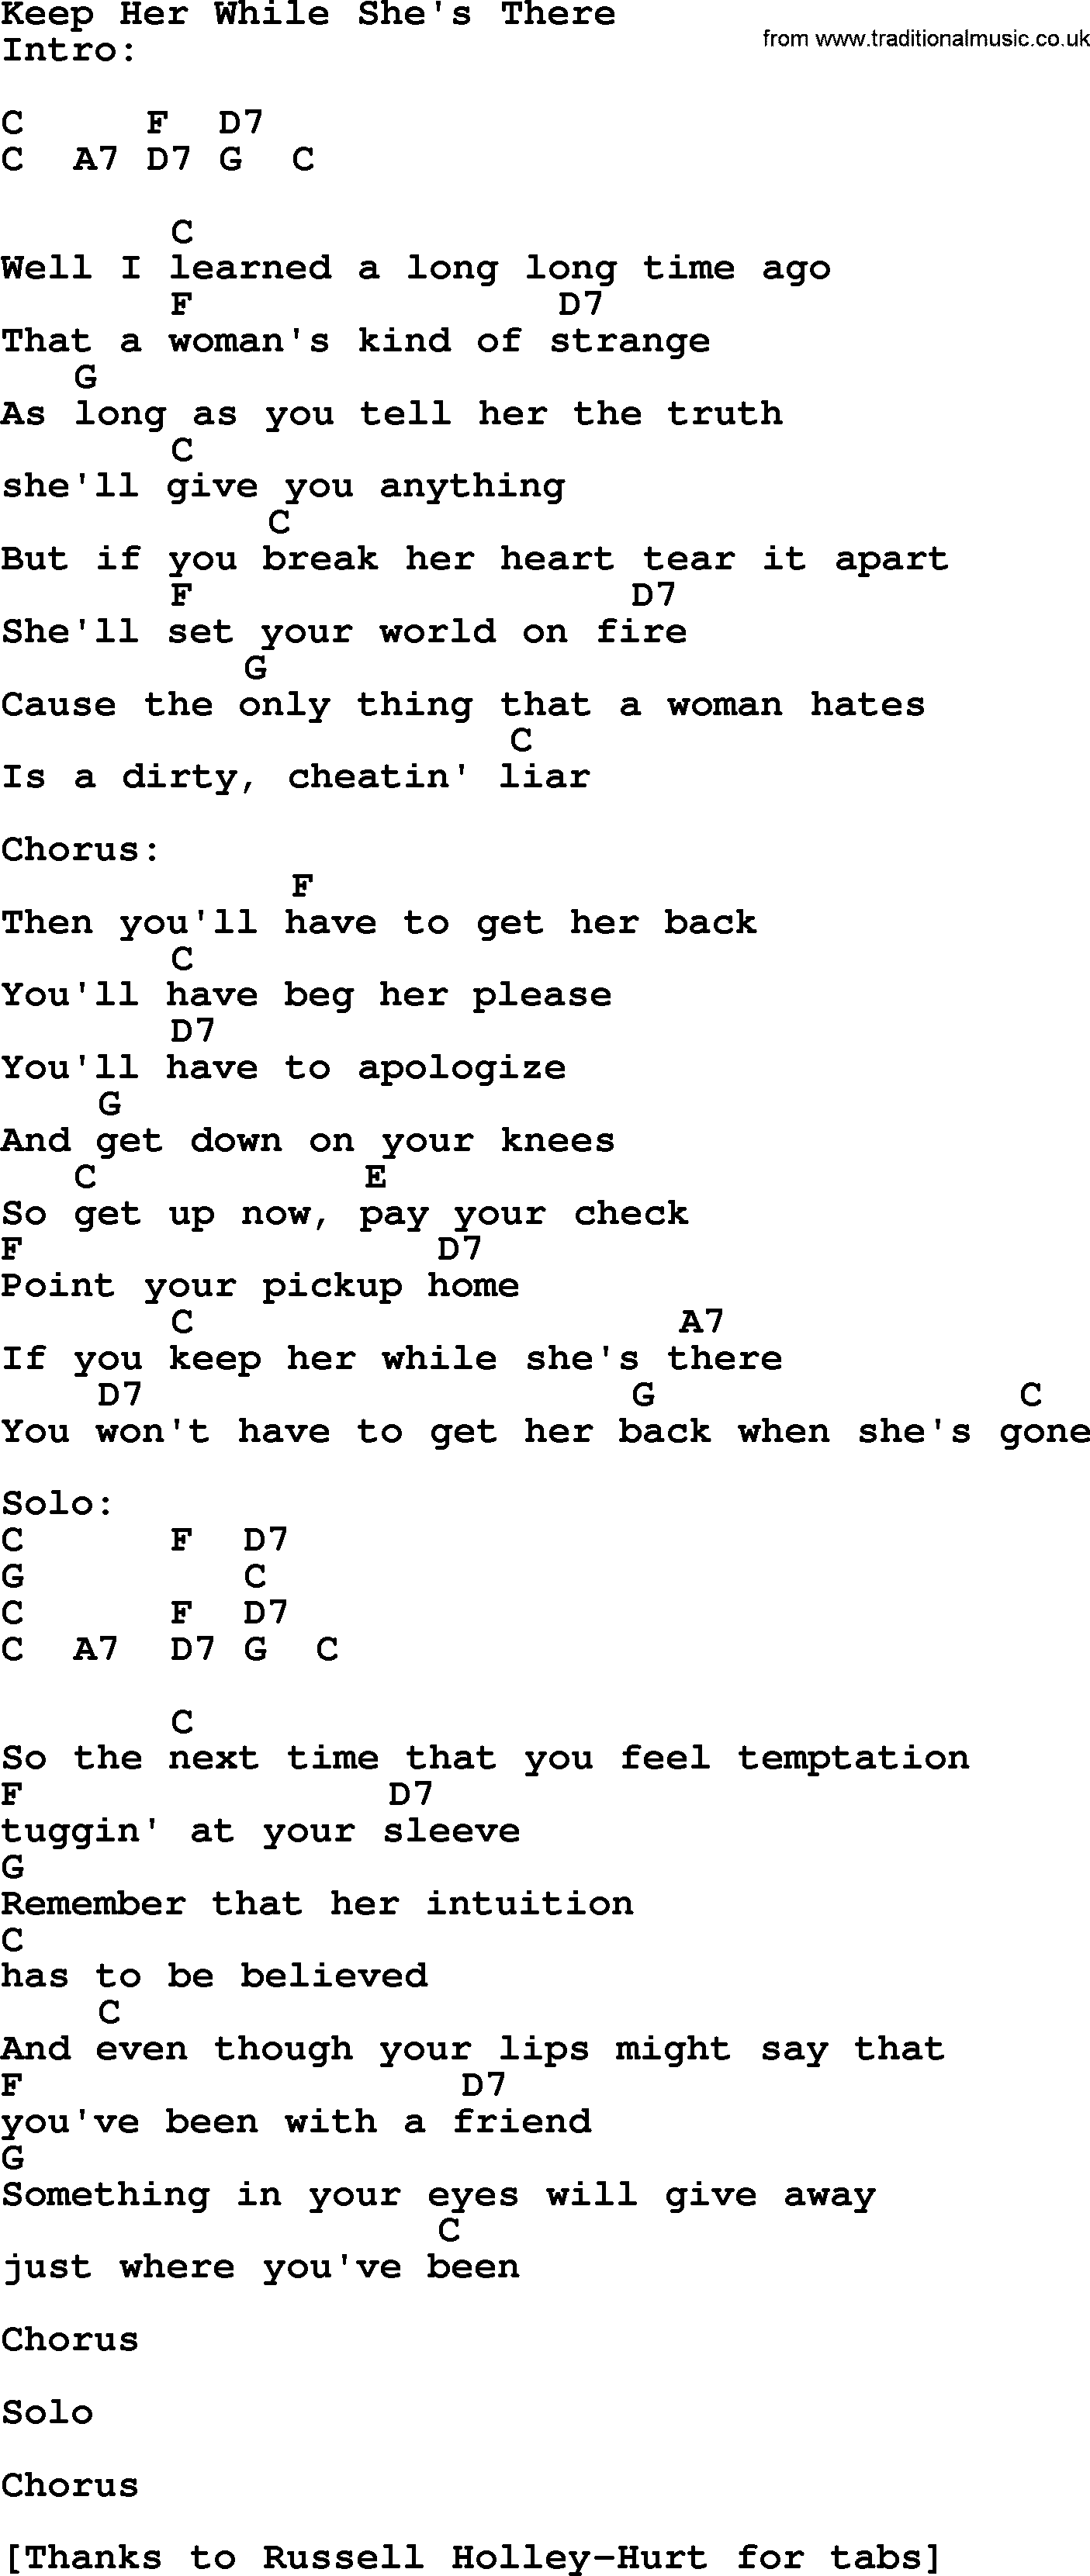 Bluegrass song: Keep Her While She's There, lyrics and chords